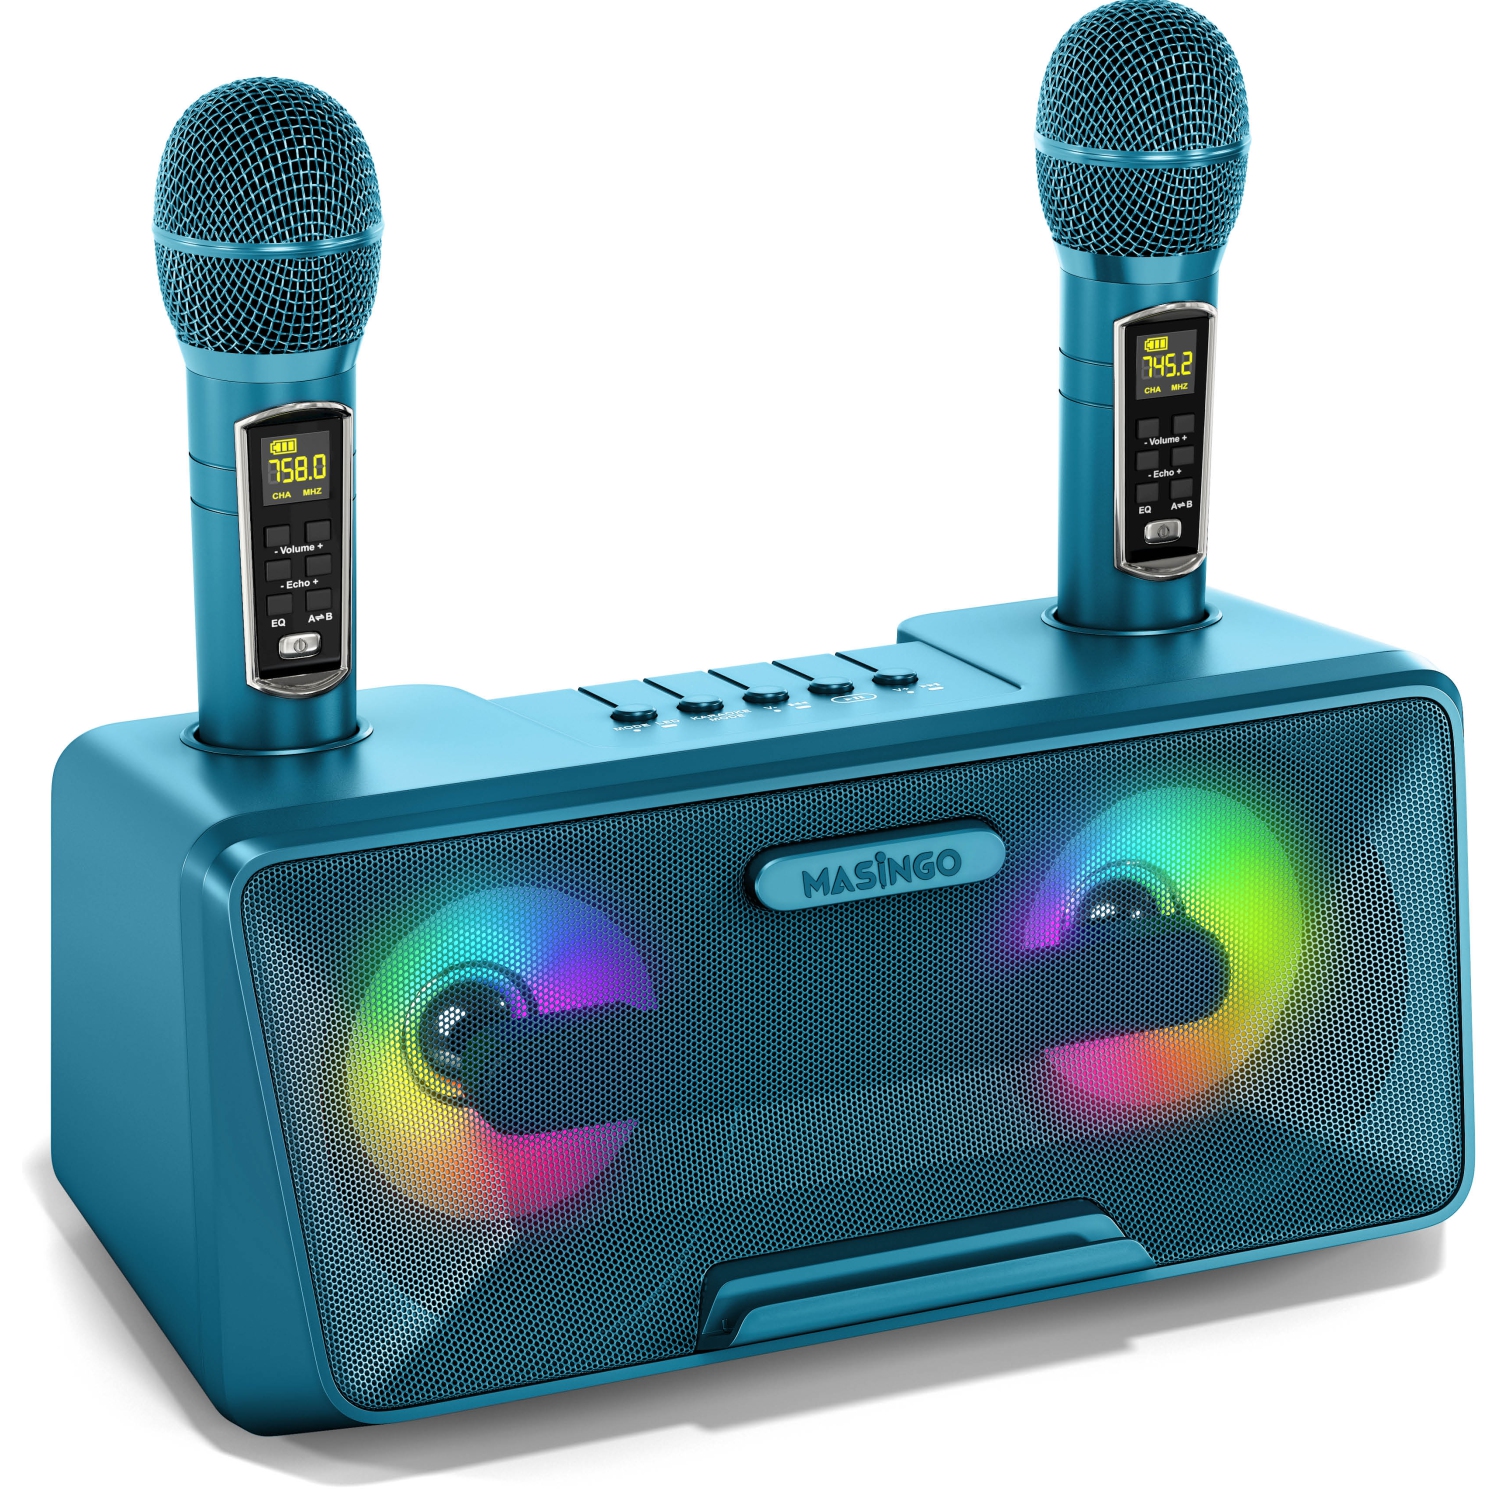 MASINGO Karaoke Machine for Adults and Kids with 2 Wireless Microphones, Portable Bluetooth Speaker, Colorful LED Lights, PA System, Lyrics Display Holder & TV Cable - Presto G2